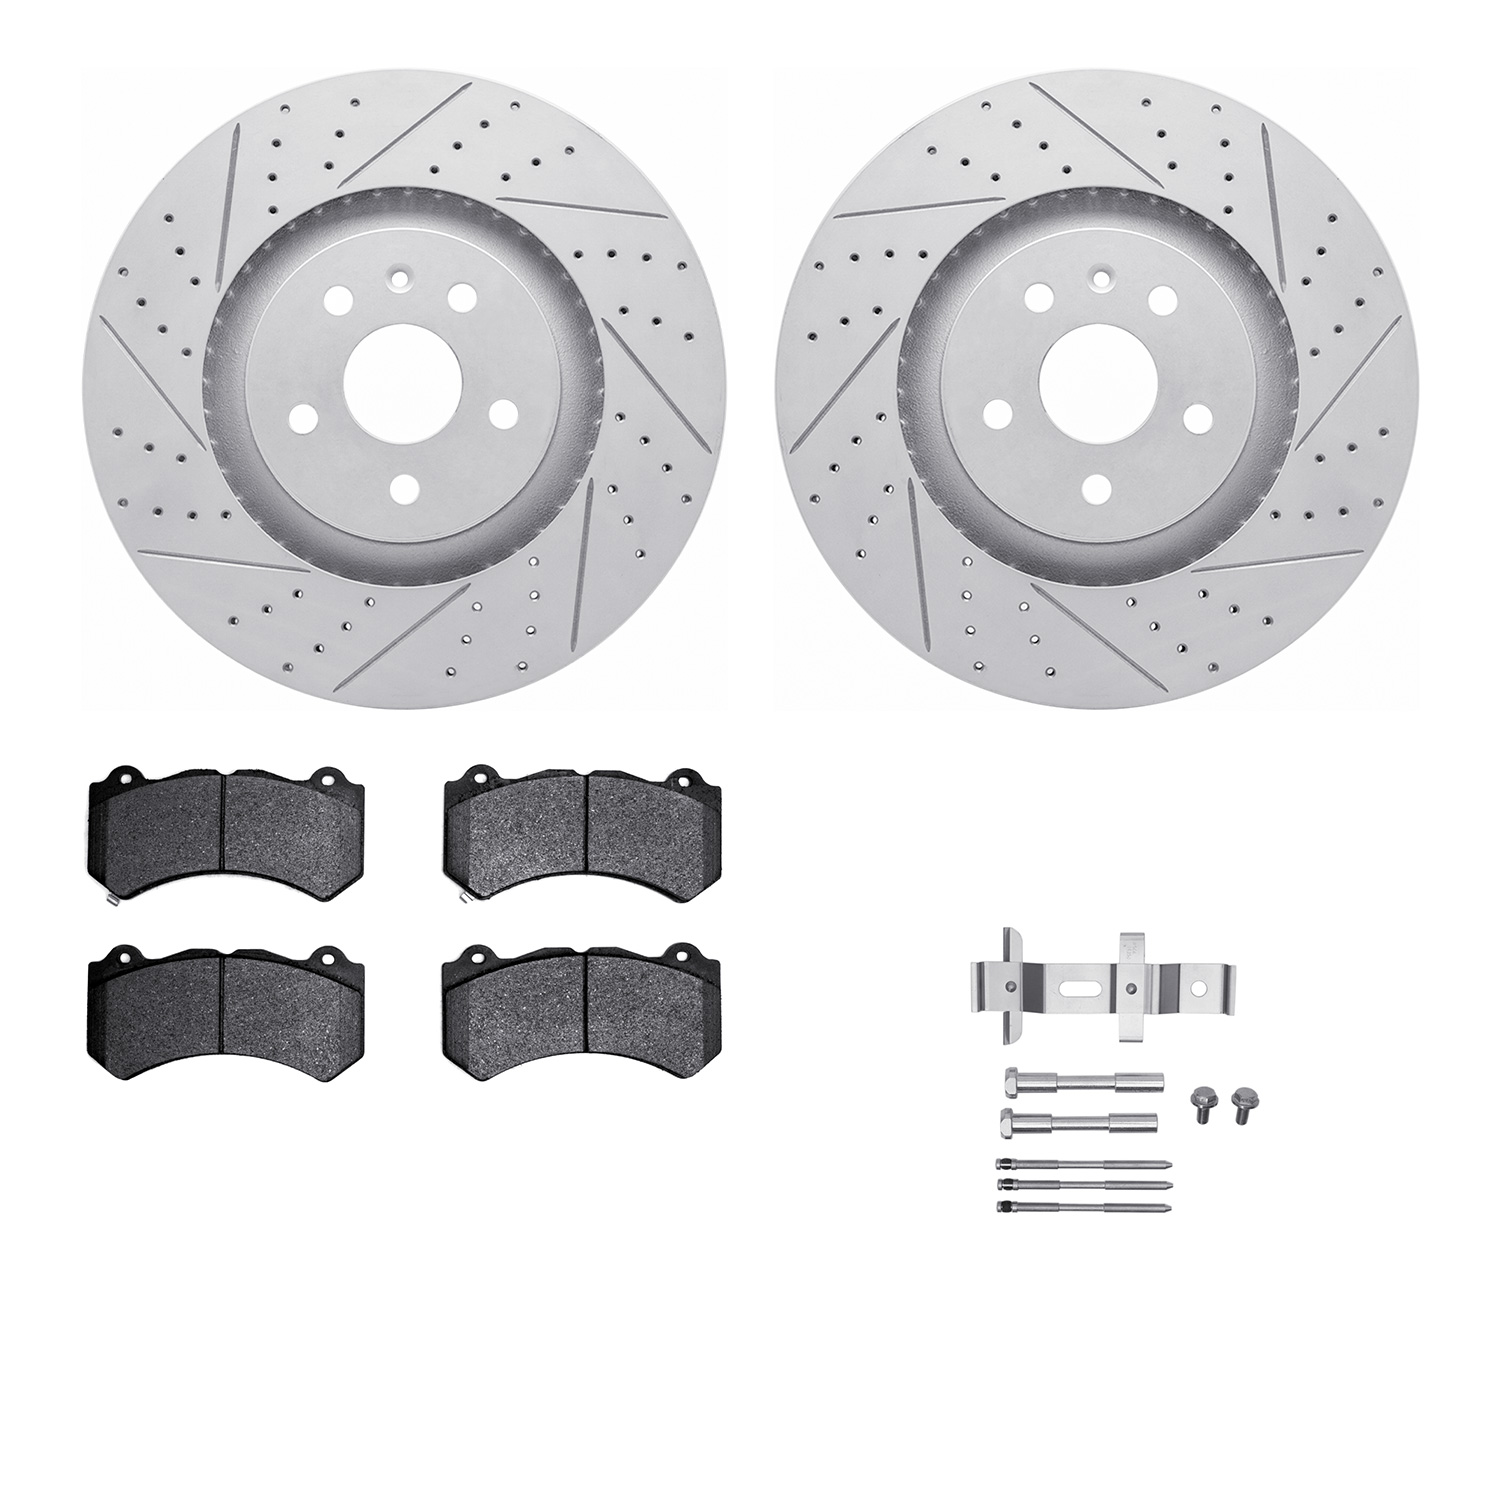 2512-46151 Geoperformance Drilled/Slotted Rotors w/5000 Advanced Brake Pads Kit & Hardware, 2009-2015 GM, Position: Front